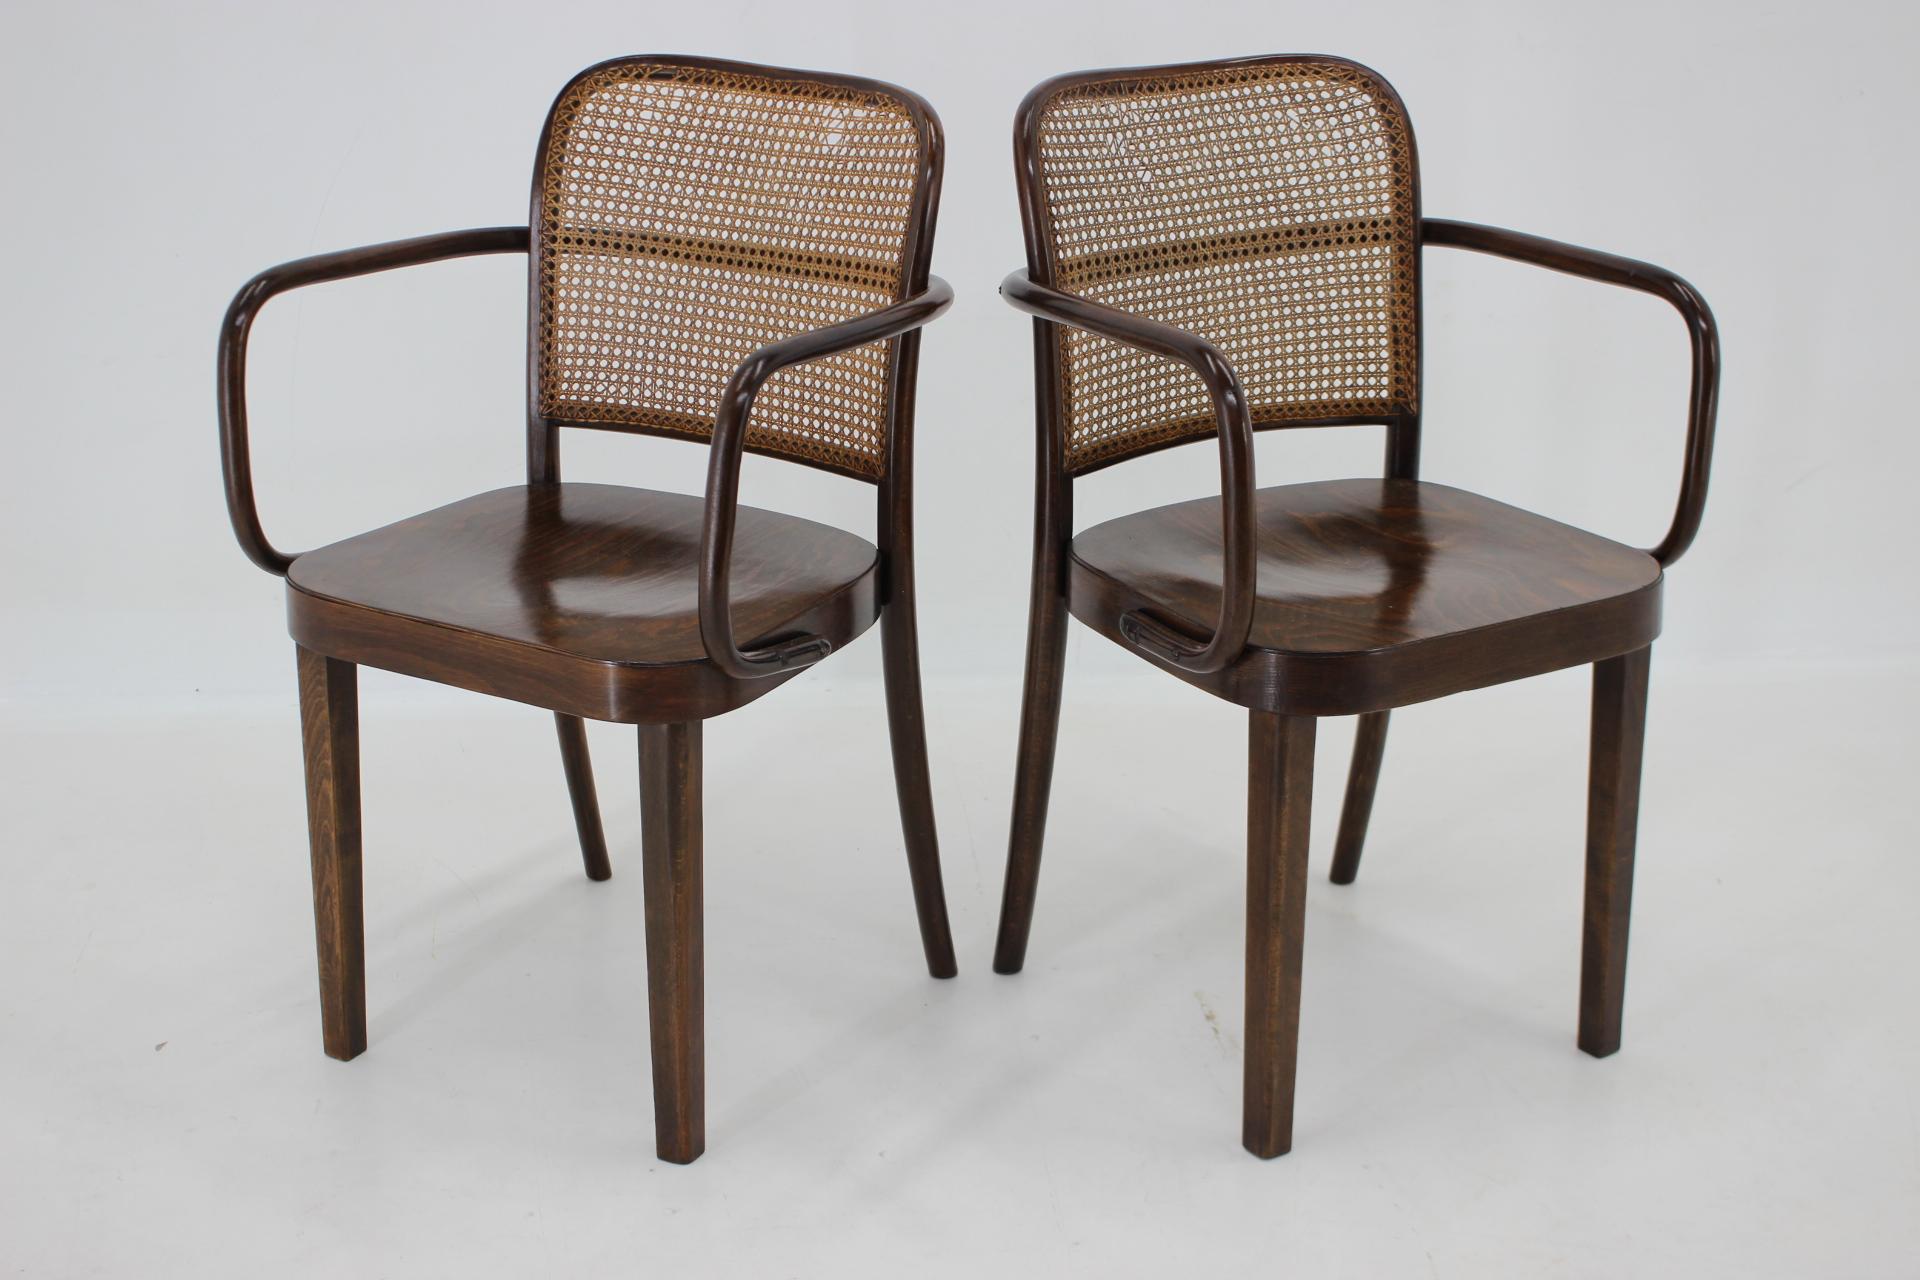 1920s Josef Hoffmann Bentwood Chairs, No. 811 for Thonet, Czechoslovakia In Good Condition For Sale In Praha, CZ